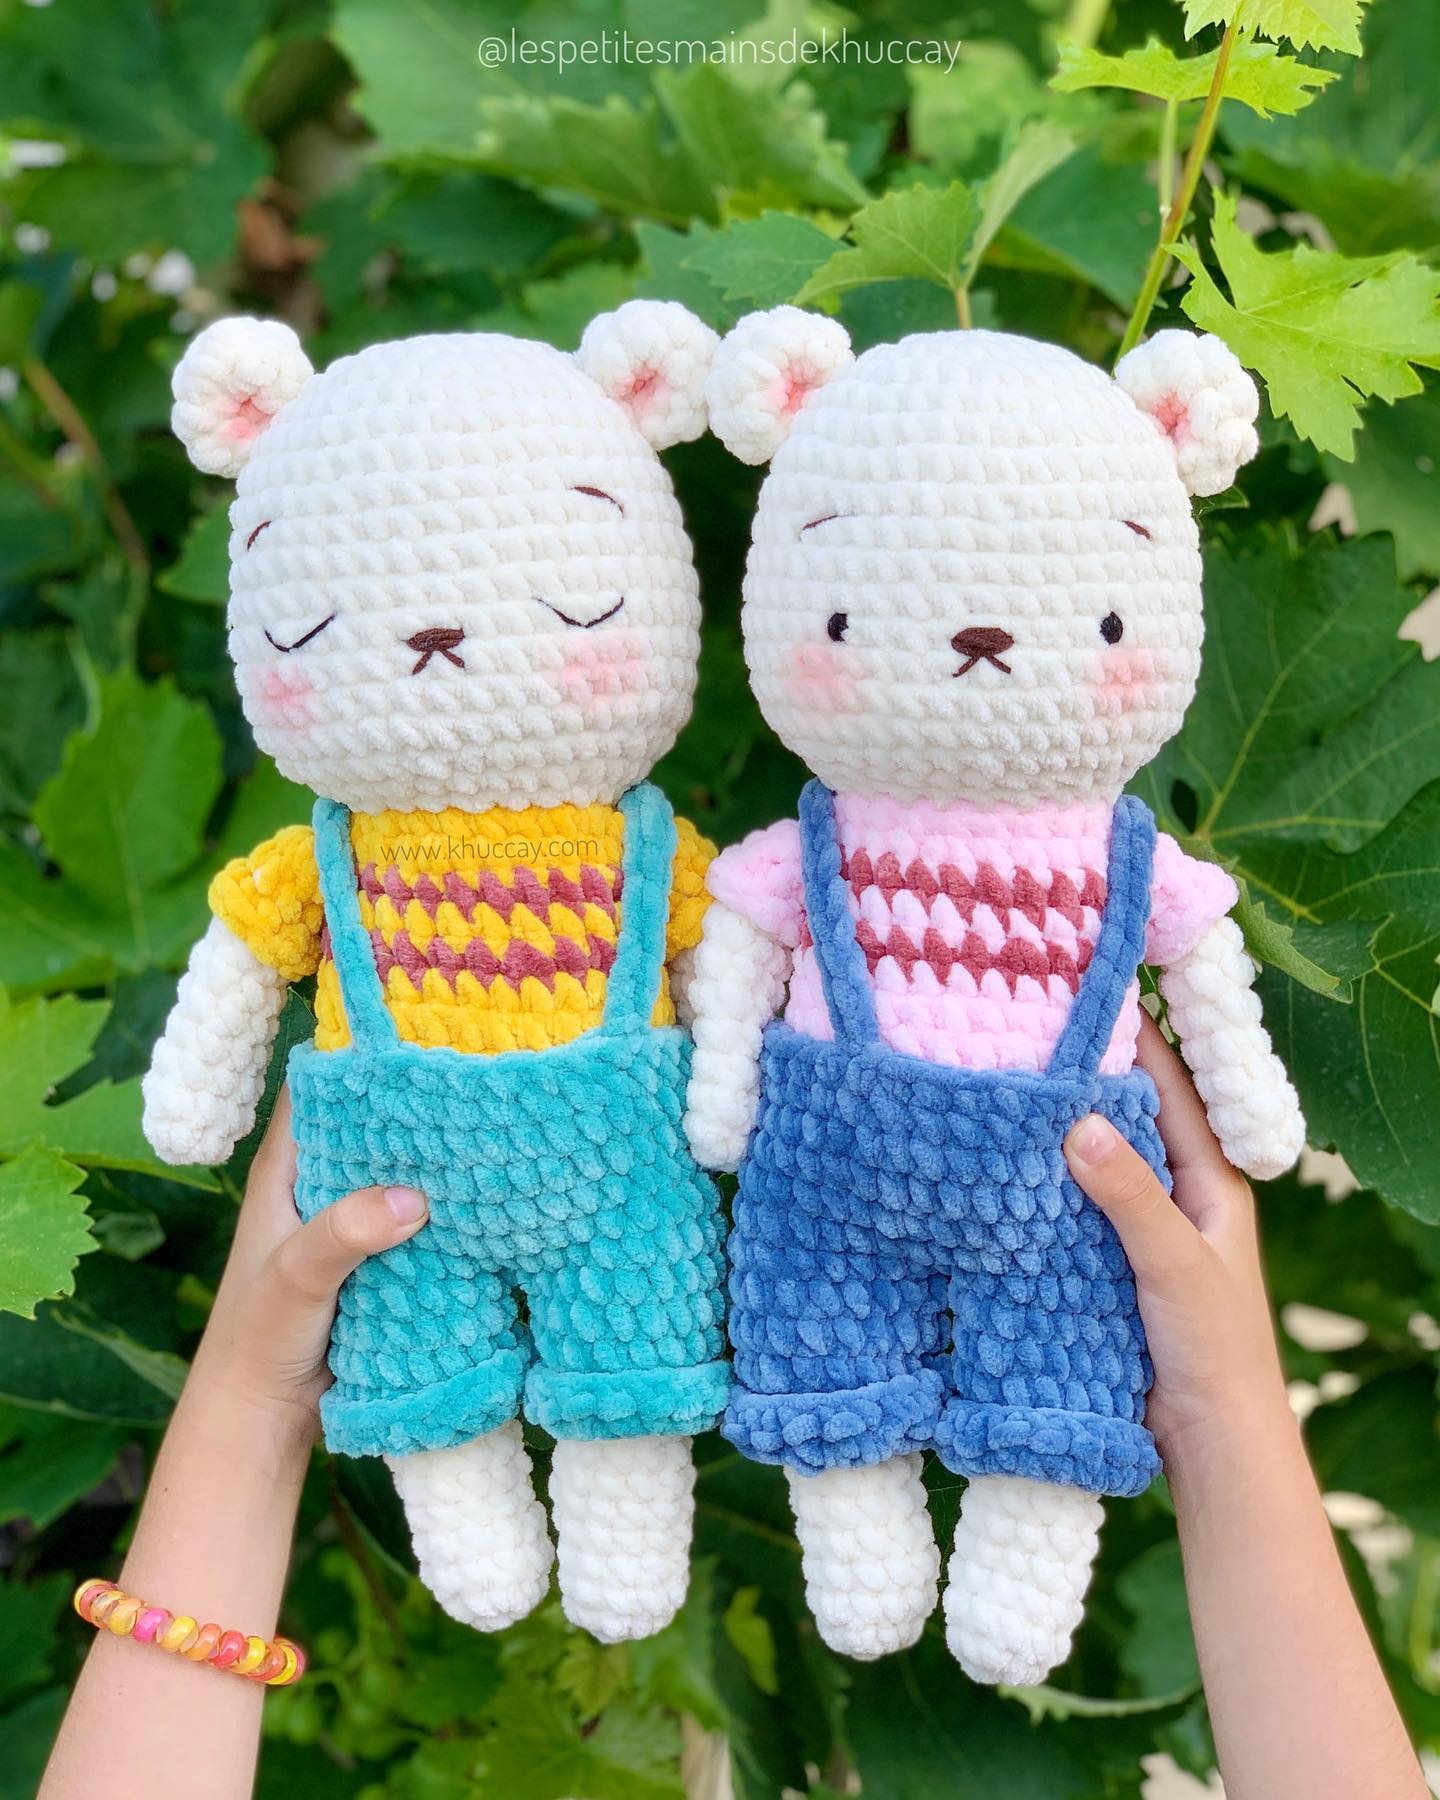 Because one is not enough… and I am a typical Libra so I can’t choose A or B 😂  So many of you have voted for the green pants for the pink t-shirt in my previous post (it’s surprising as I was for blue!) then here are more options to mix and match 😆  Pattern Barry the bear is available on my shops and website www.khuccay.com - English (US terms), Français, Español & Tiếng Việt.
Let’s join me to crochet these cuddle bears! I’d love to see them in your colors 😊  Love 💕